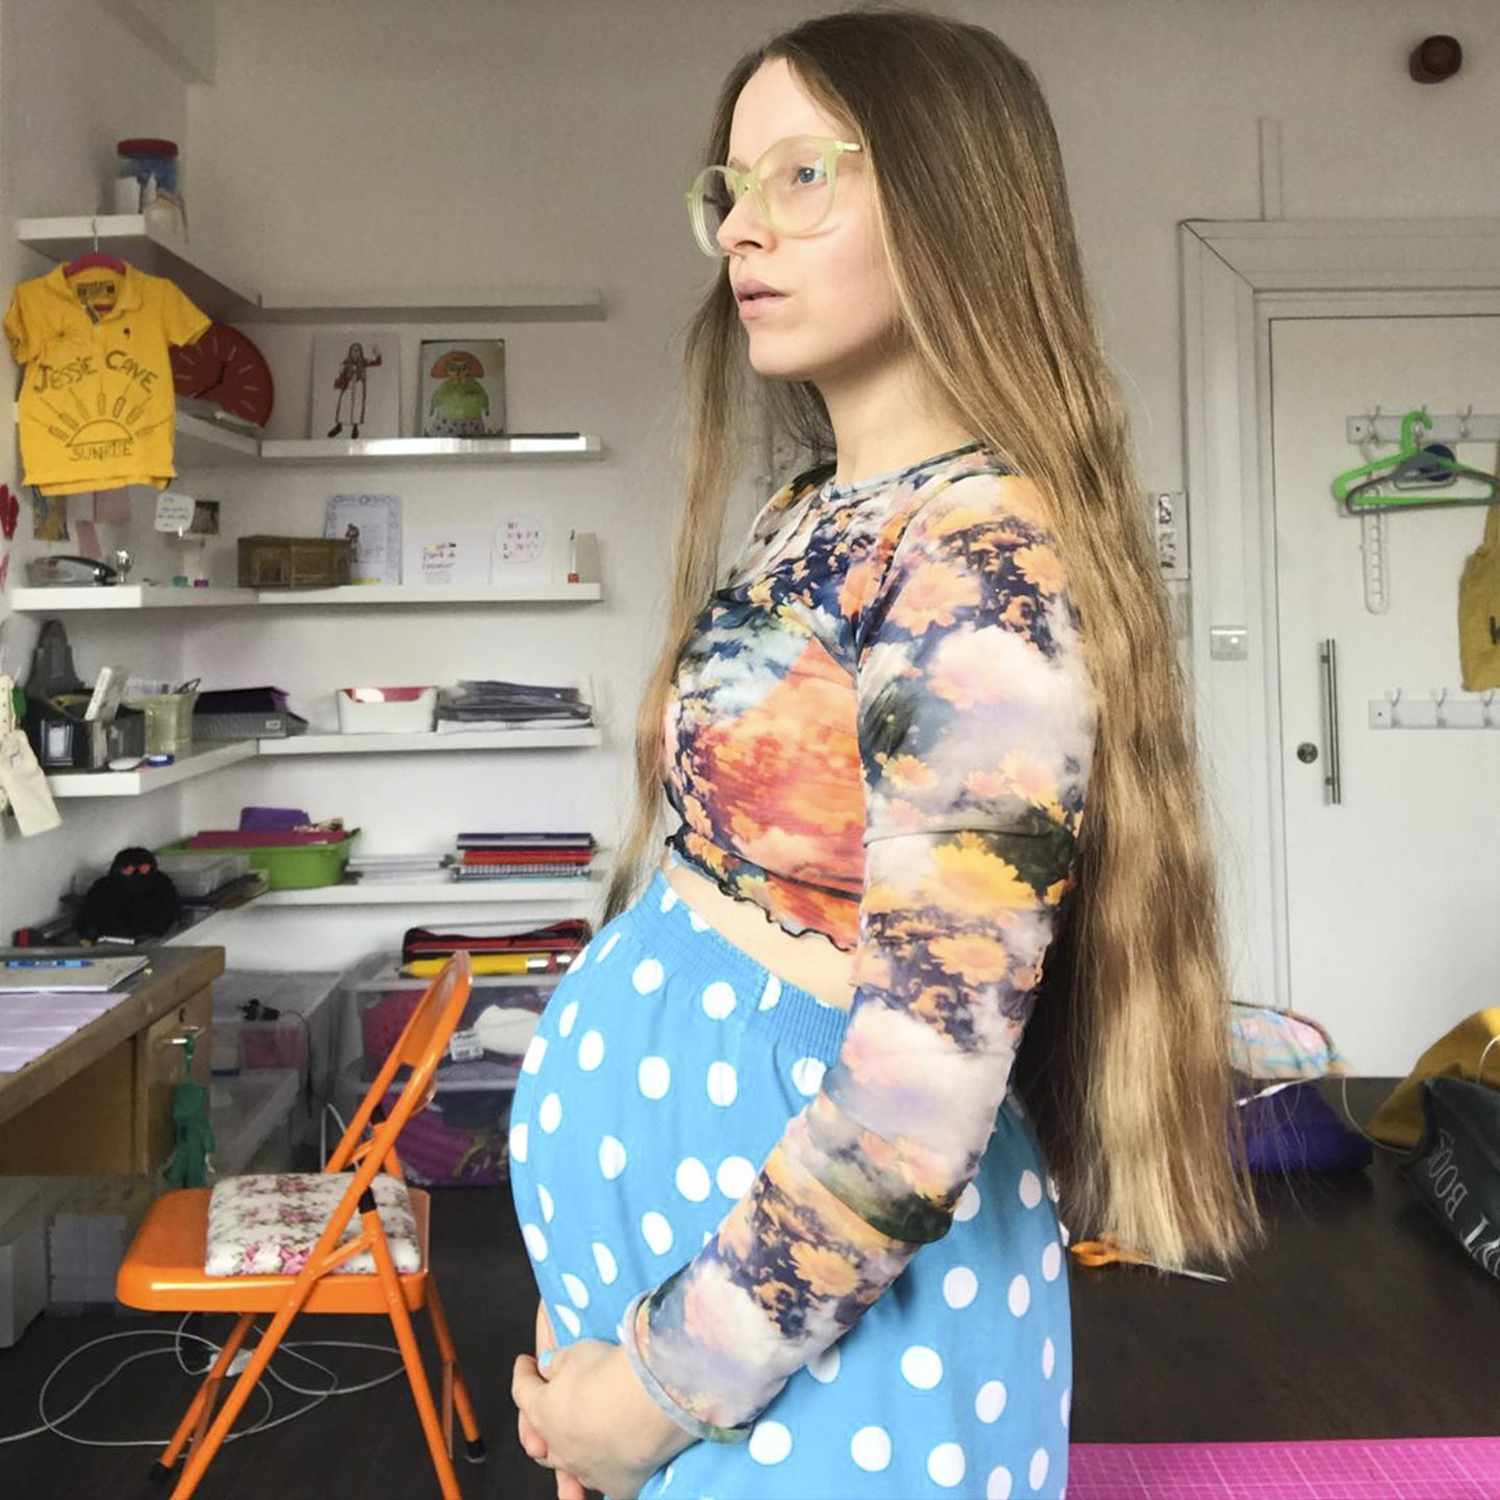 Related image of Pregnant Harry Potter Star Jessie Cave Is Hospitalised Aft...